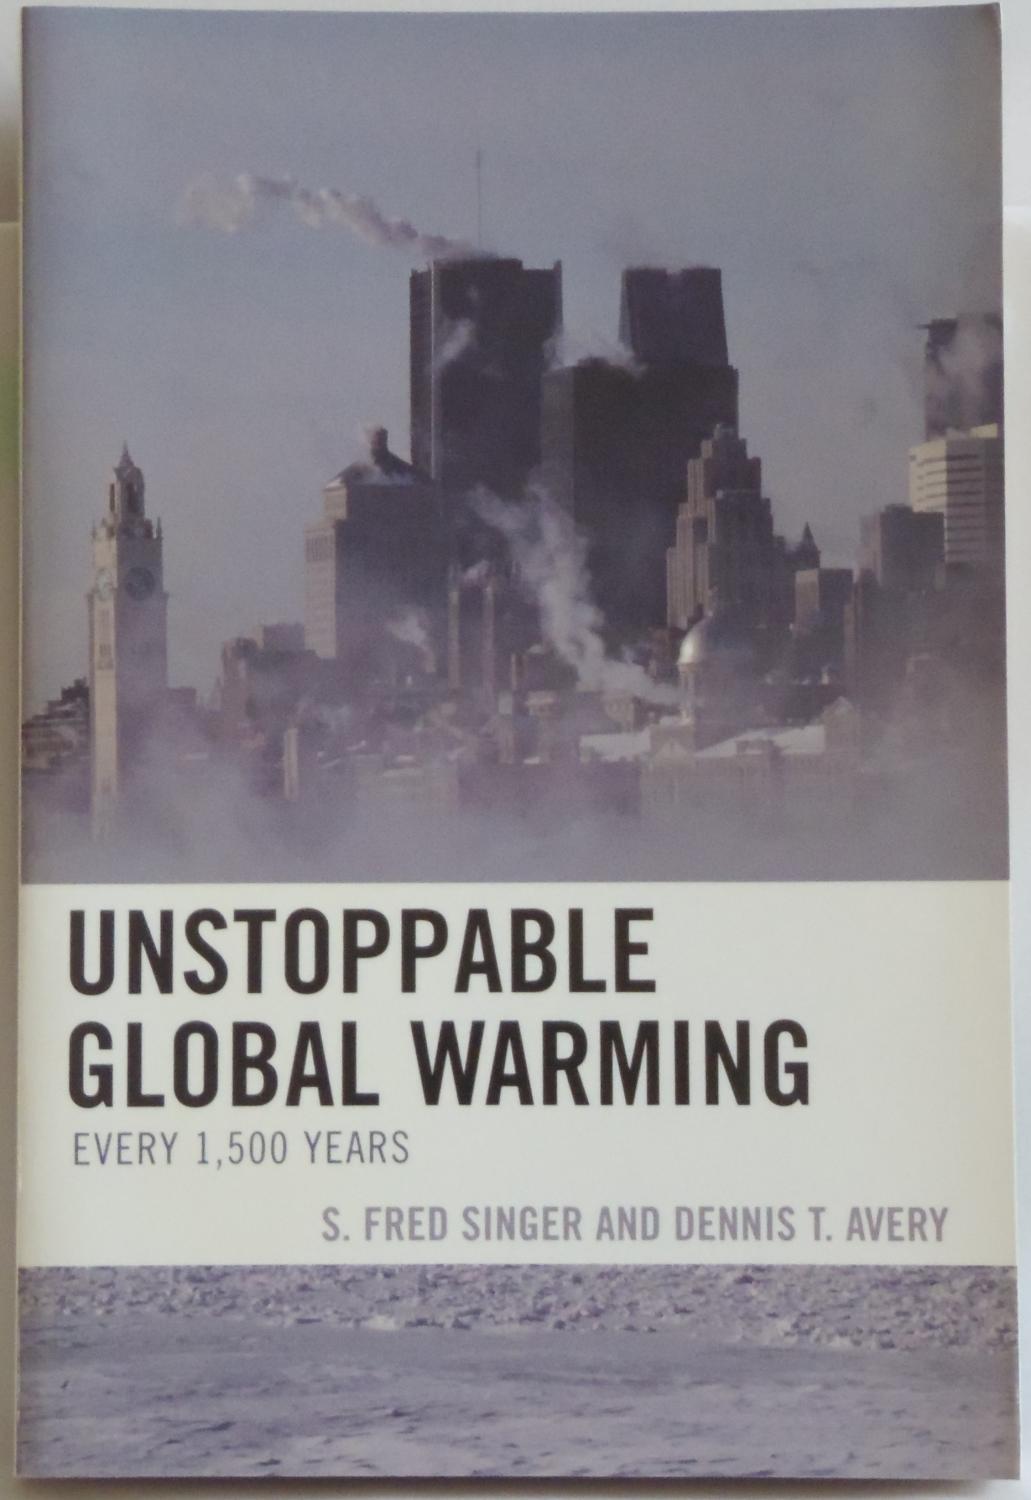 Unstoppable Global Warming: Every 1500 Years by Dennis T. Avery; S. Fred Singer - Dennis T. Avery; S. Fred Singer